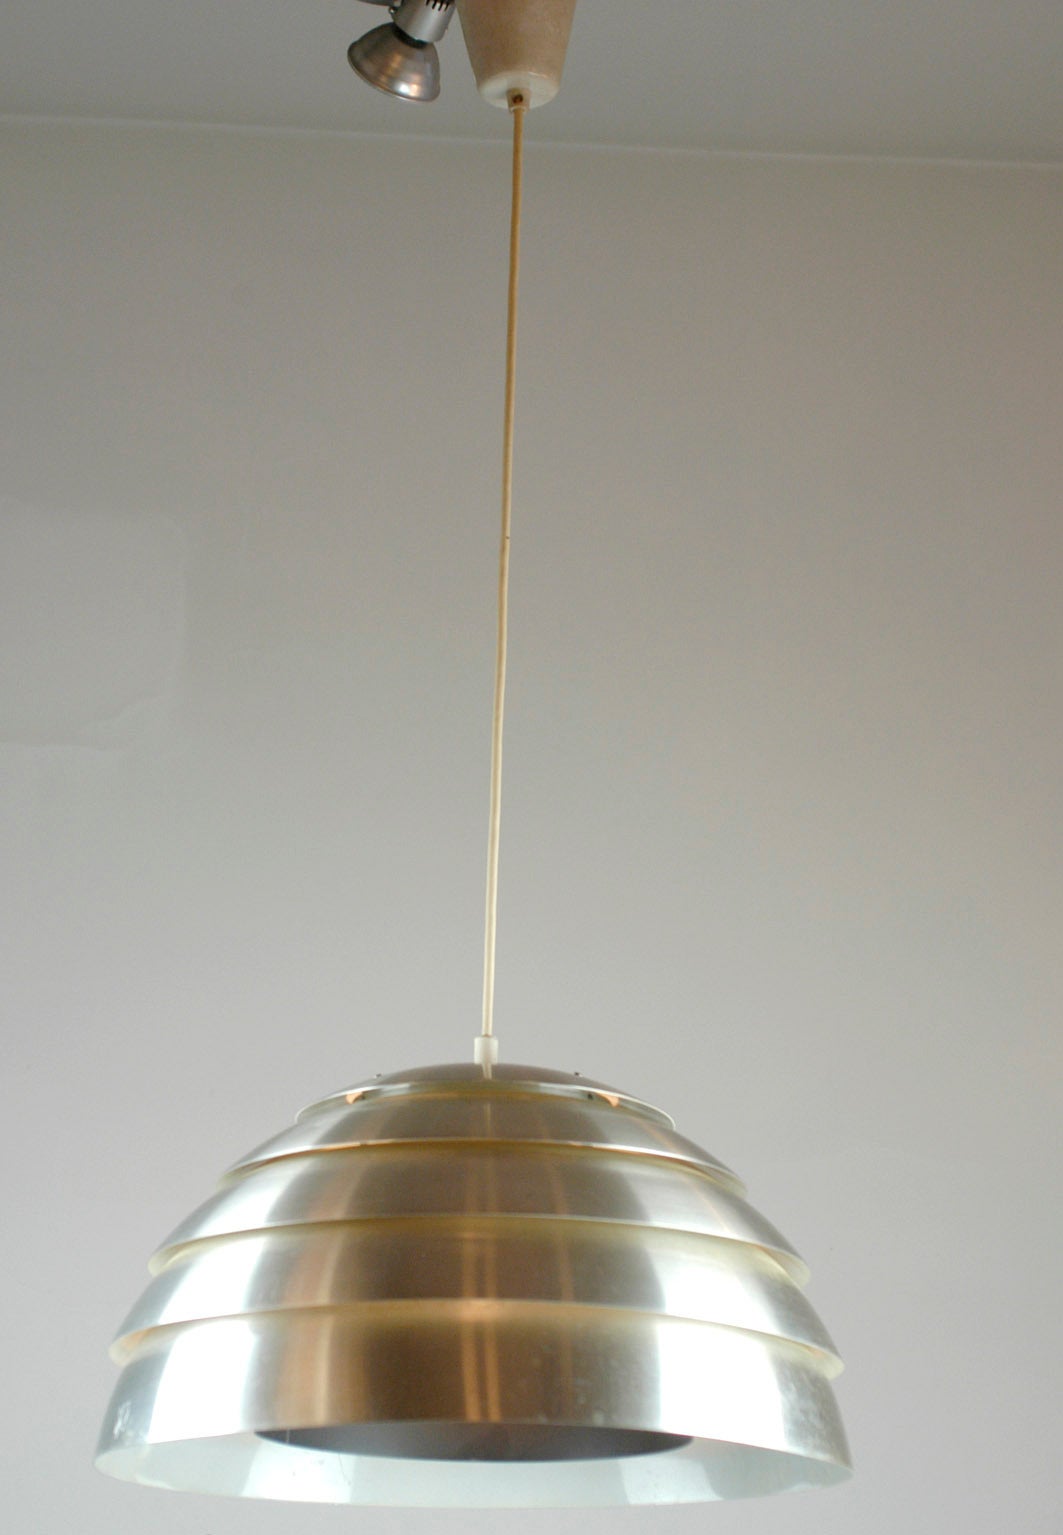 Mid-20th Century Scandinavian Modern Brushed Aluminum Ceiling Light Dome by Hans-Agne Jakobsson